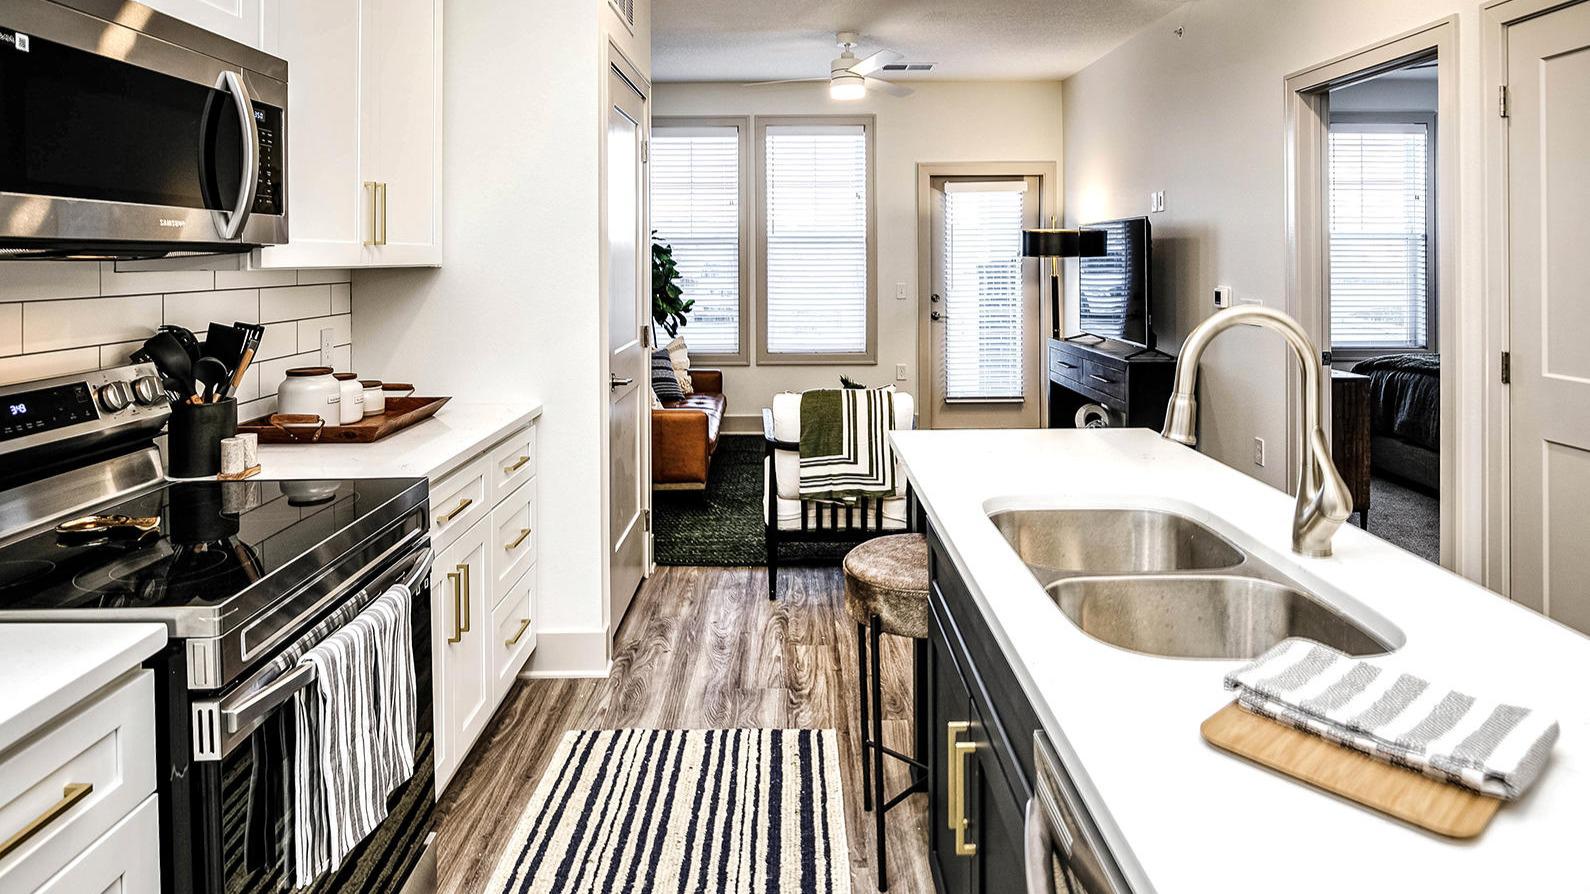 Studio, one, and two-bedroom apartment homes with stainless steel appliances, quarts countertops, designer cabinetry, large kitchens, luxury vinyl plank flooring, high vaulted ceilings, high-end lighting, in-unit washer and dryer, and energy efficient windows at Fireside at Waukee in Waukee, IA